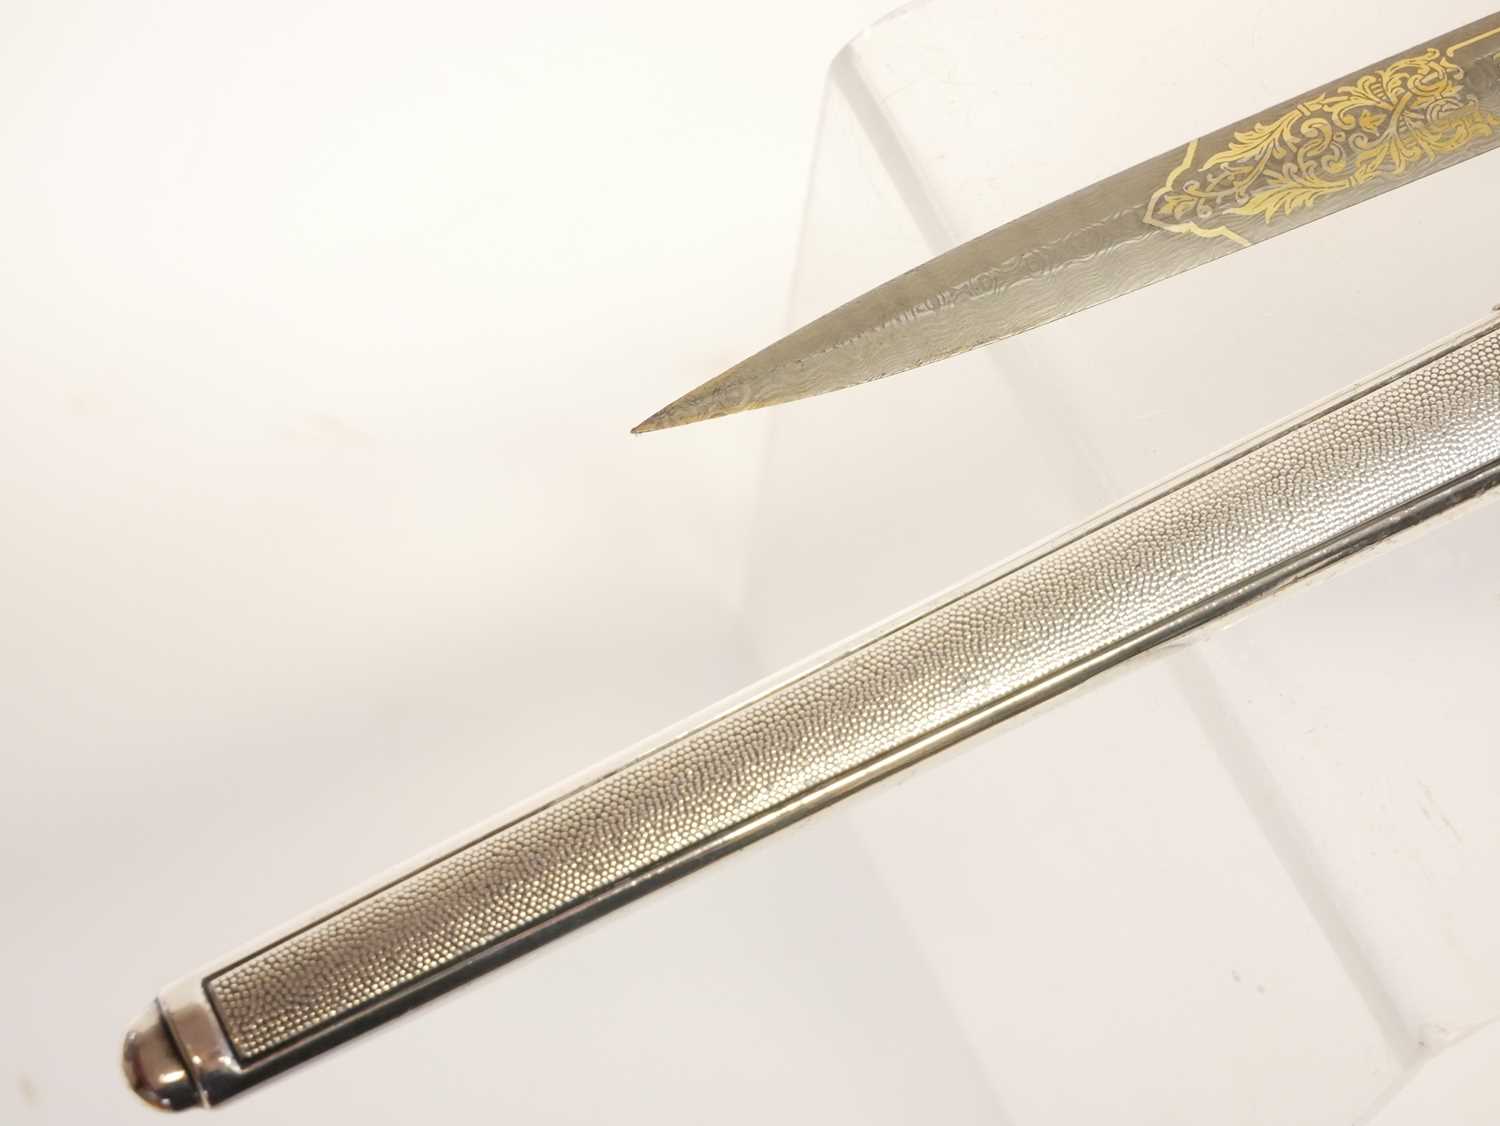 German WWII Army officers dagger and scabbard, artificial Damascus blade etched 'Krefelder Transport - Image 4 of 15